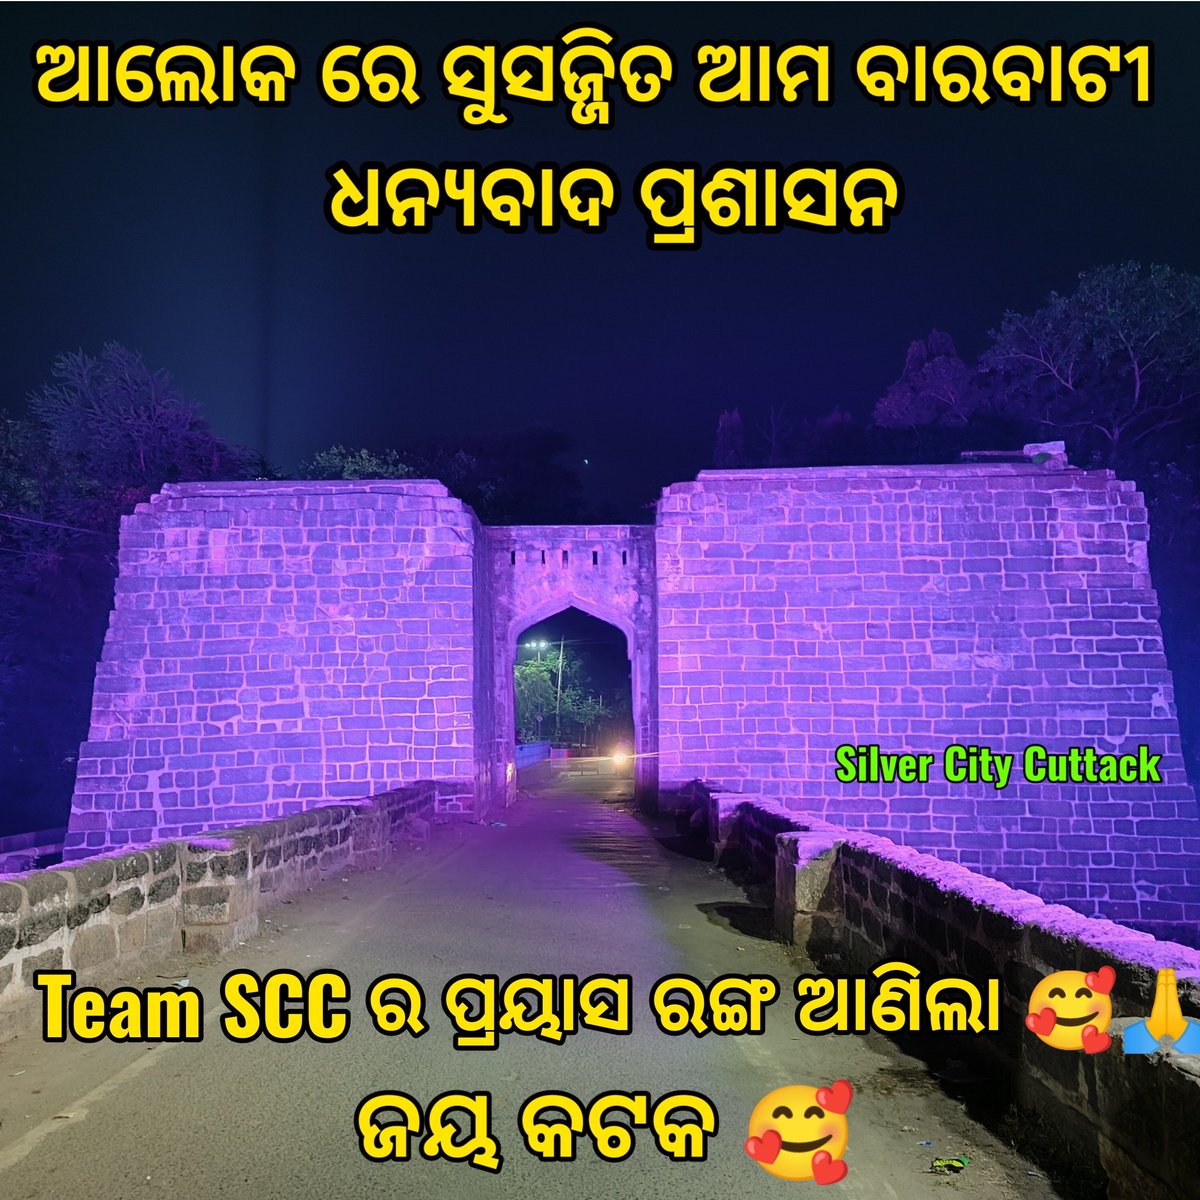 Thank you so much on behalf of People of Cuttack for decking up Historic Barabati Fort on the eve of Bali-Jatra. We extend our gratitude for considering our request to @SSingh_odisha Sir @ASIGoI @CMCCuttack @Culturedeptt Jay Cuttack 🙏❤️